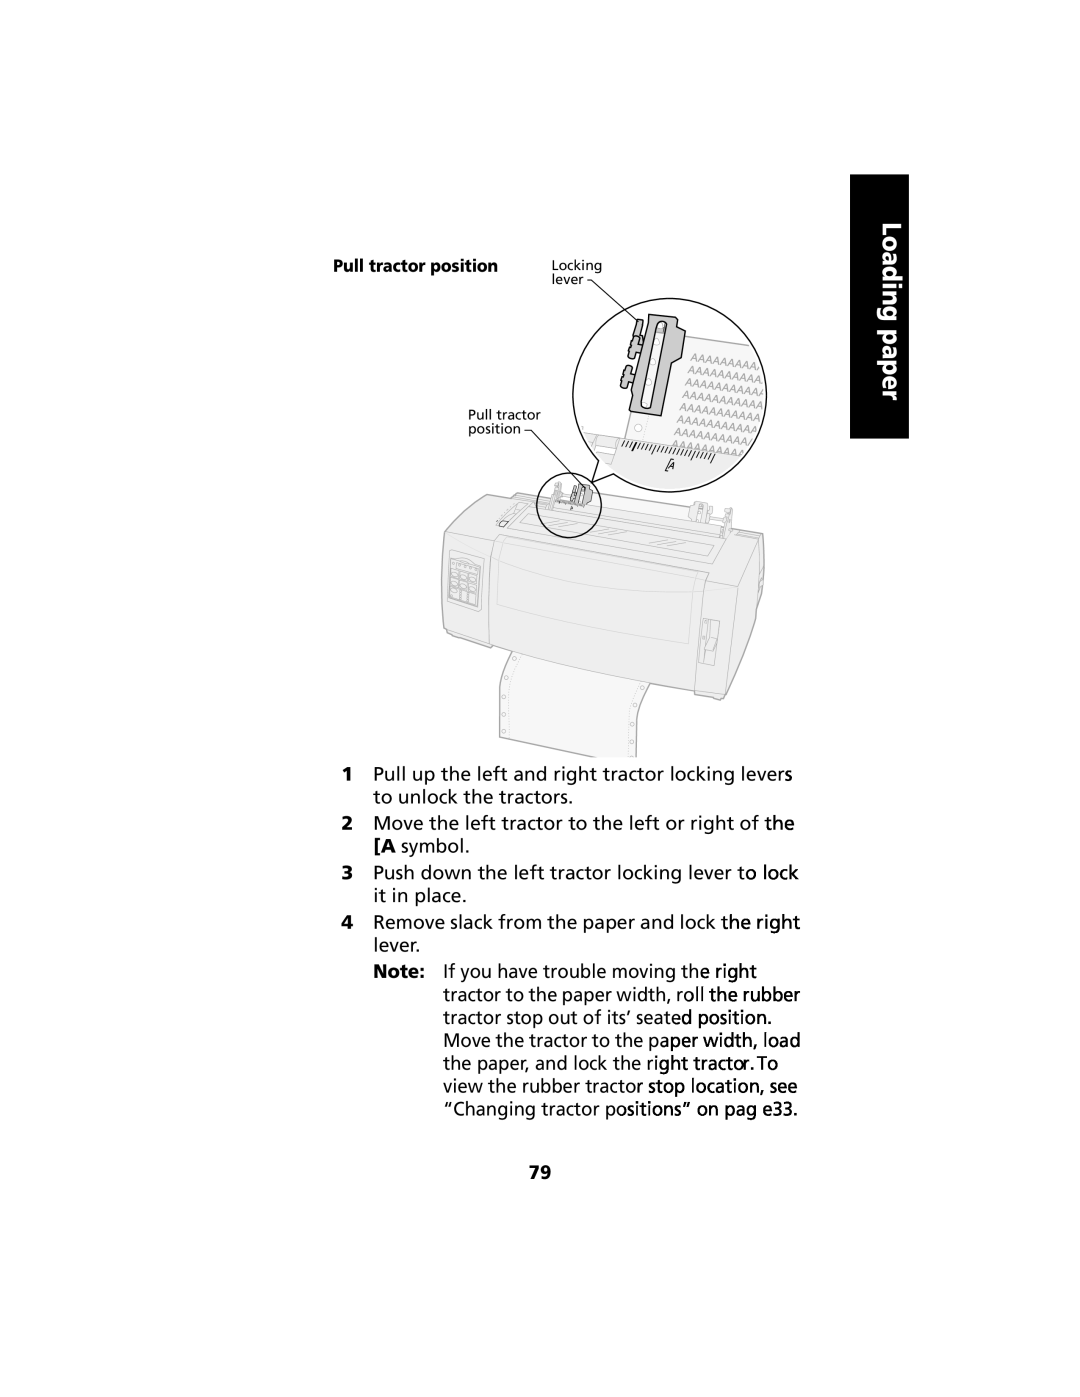 Lexmark 2480 manual Loading paper, Move the left tractor to the left or right of the A symbol 